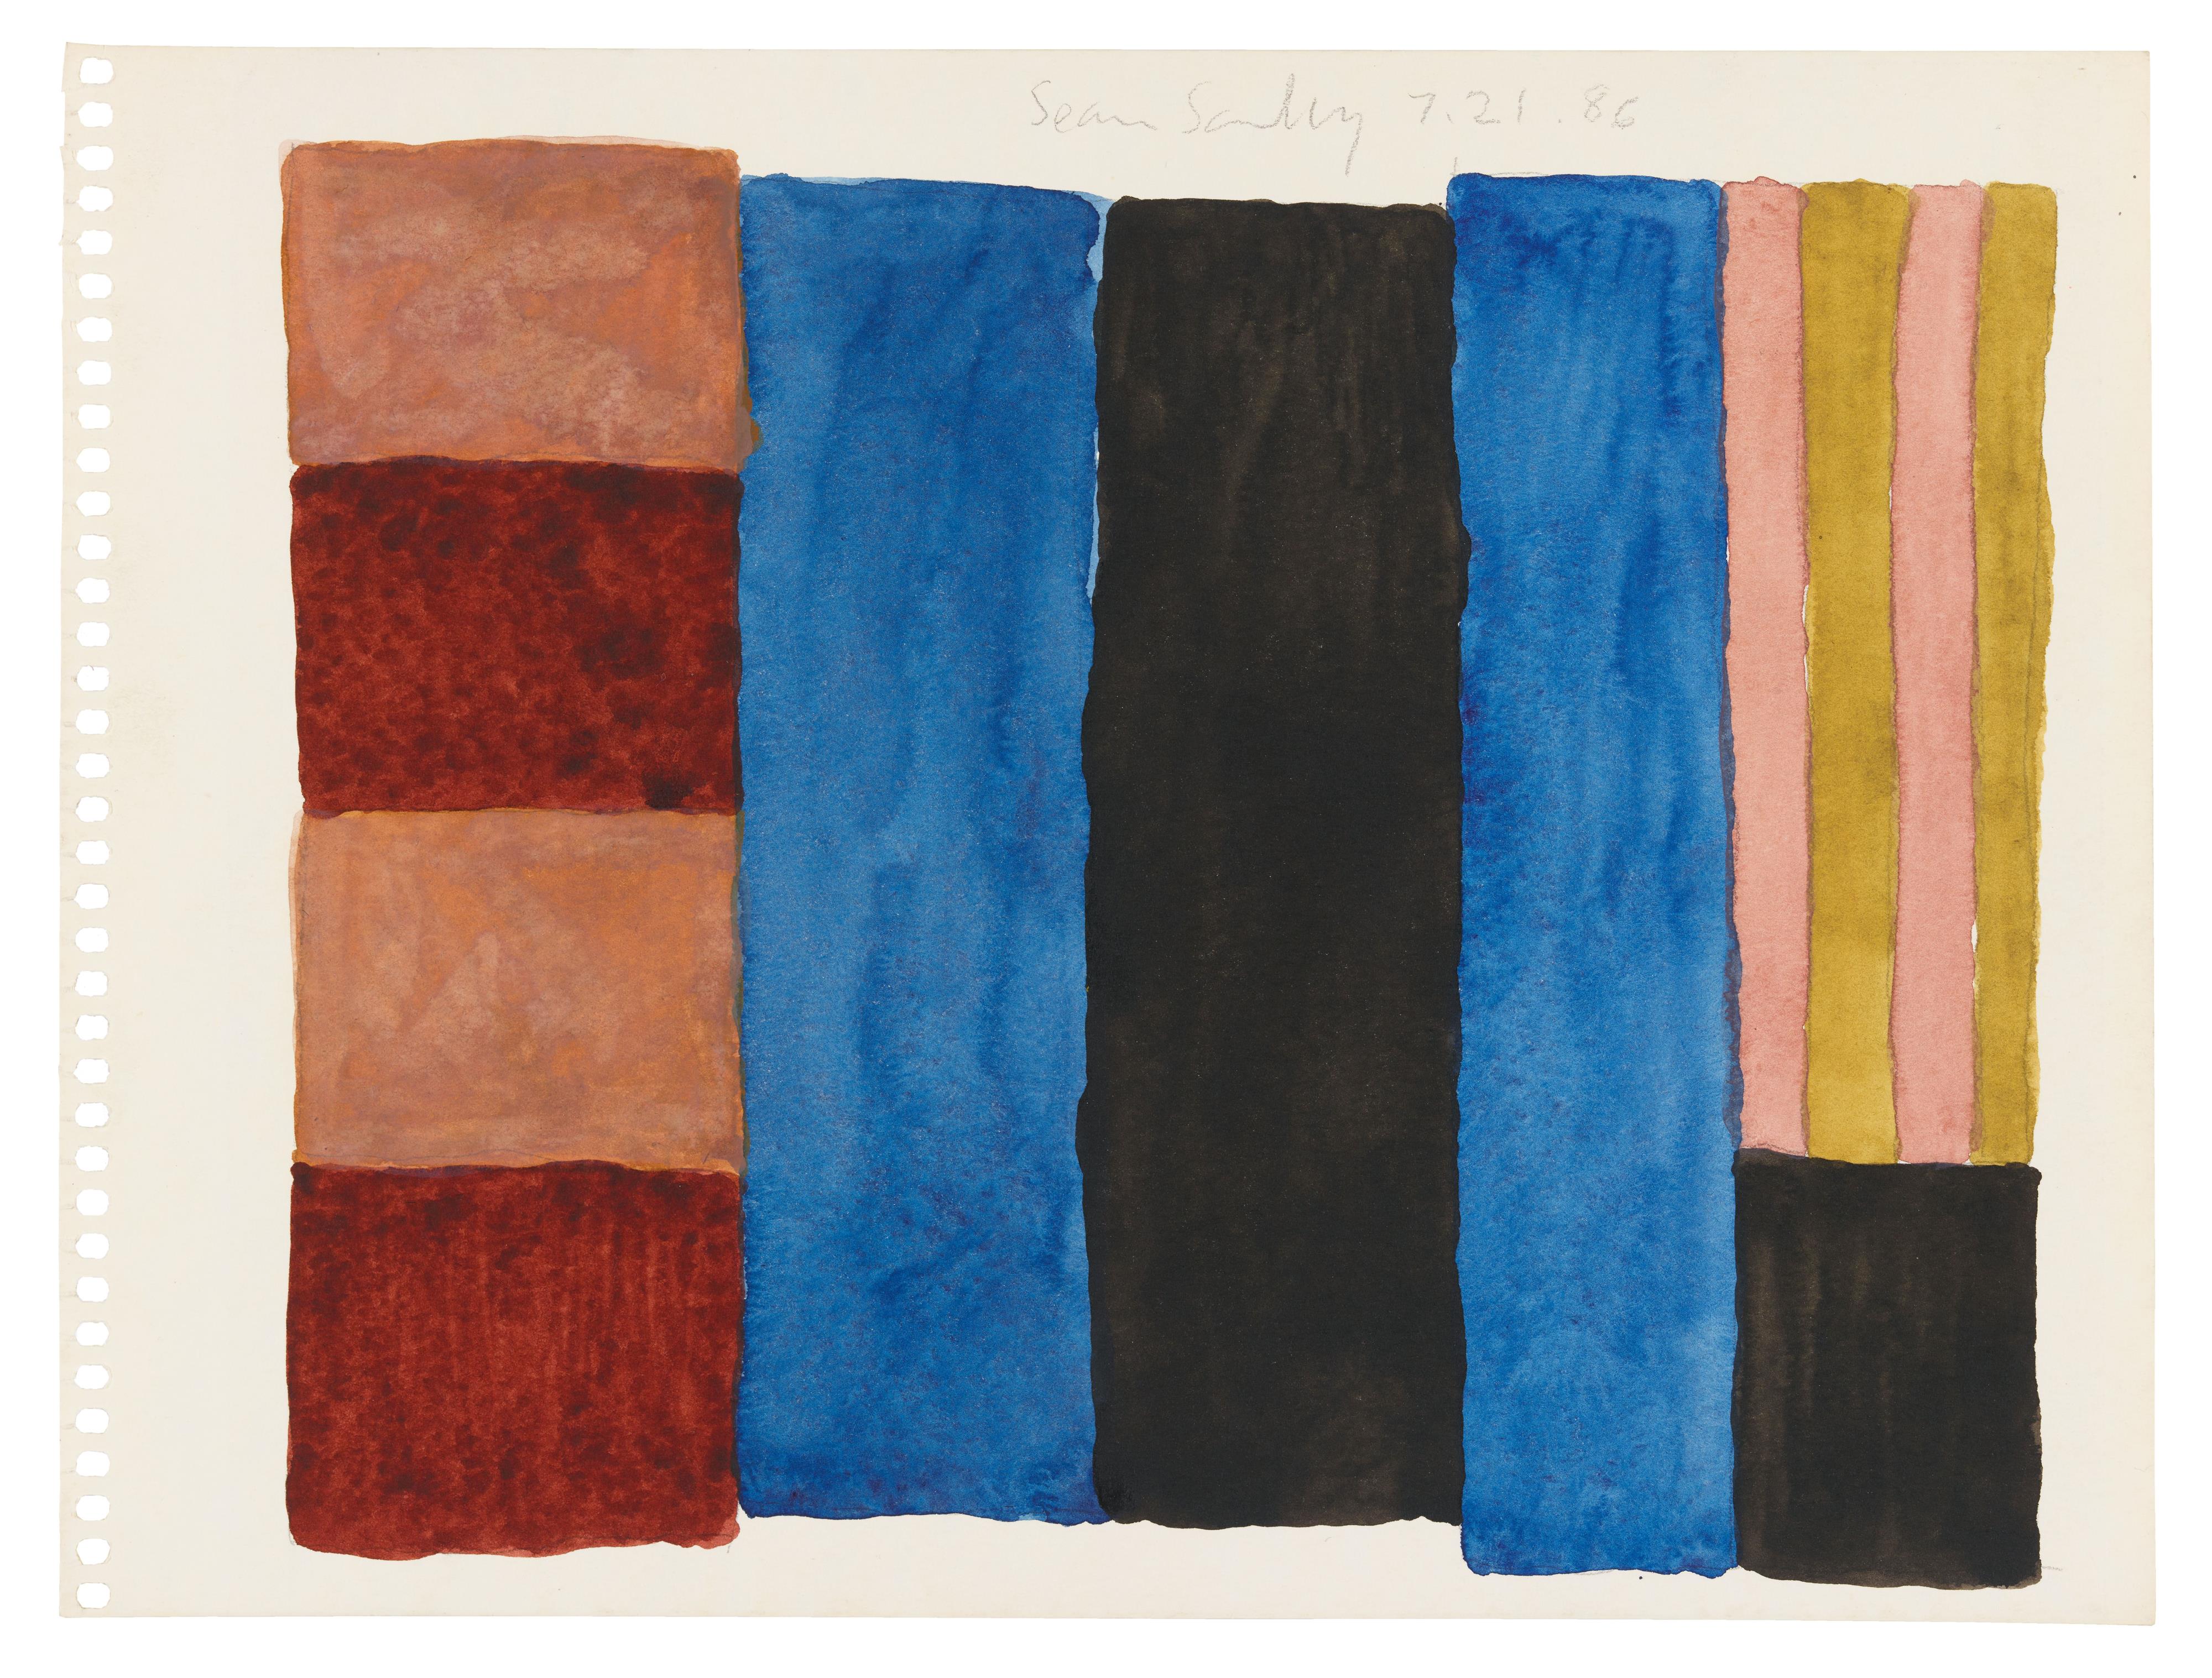 Sean Scully - Untitled (7.21.86) - image-1